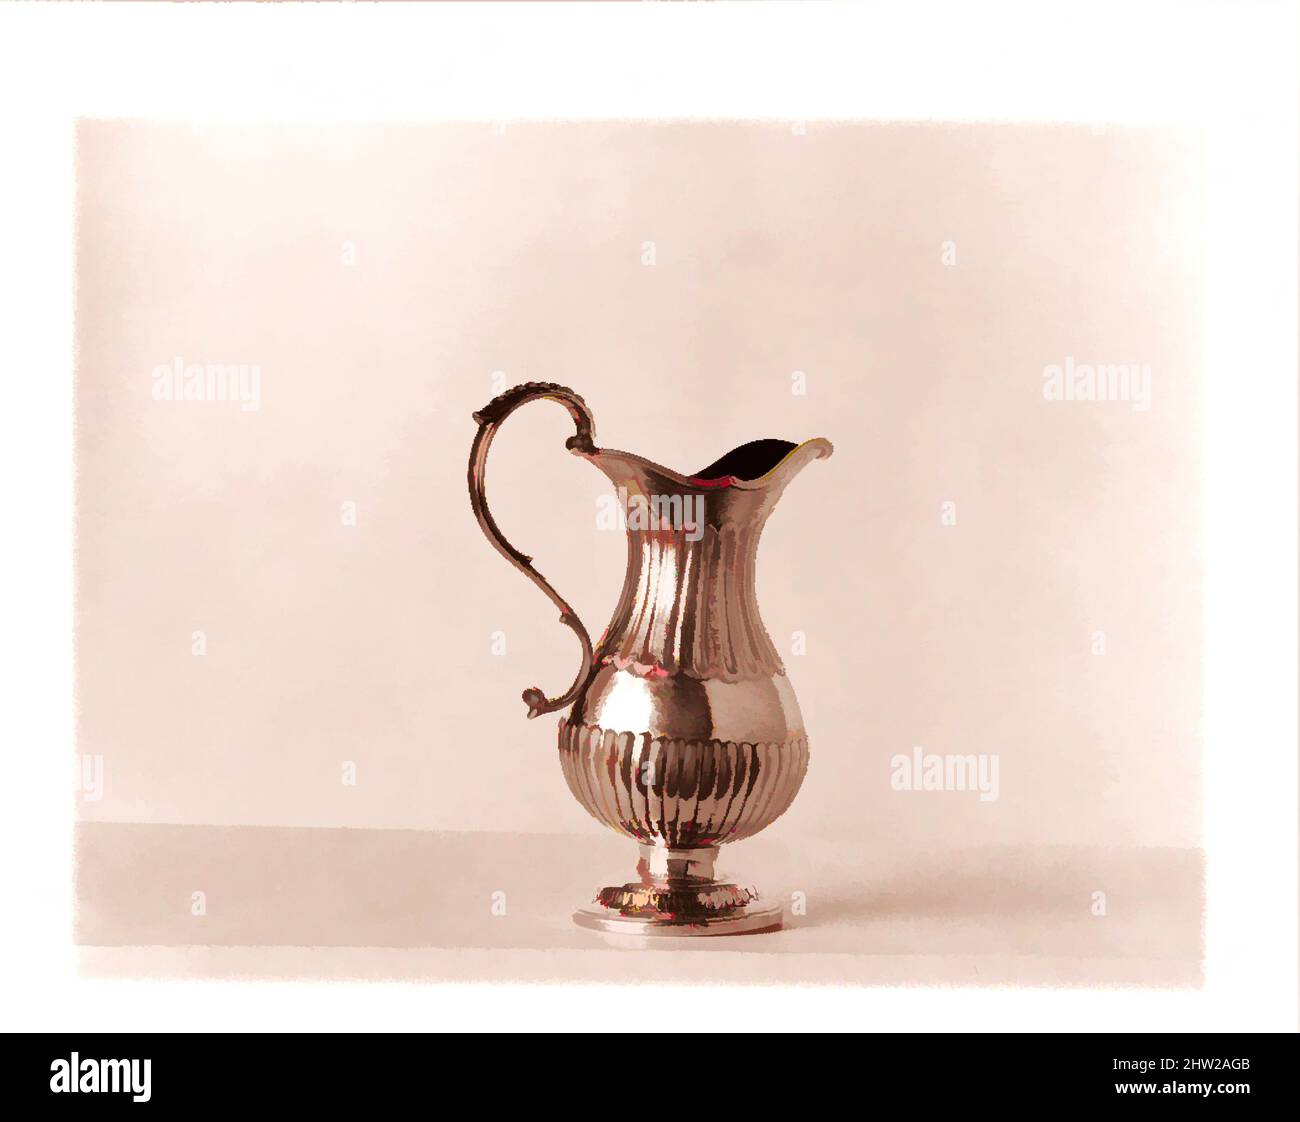 Art inspired by Creamer, ca. 1850, Made in Baltimore, Maryland, United States, American, Silver, Overall: 6 7/8 x 5 3/16 in. (17.5 x 13.2 cm); 10 oz. 14 dwt. (332.9 g), Silver, Samuel Kirk and Son (1846–68, Classic works modernized by Artotop with a splash of modernity. Shapes, color and value, eye-catching visual impact on art. Emotions through freedom of artworks in a contemporary way. A timeless message pursuing a wildly creative new direction. Artists turning to the digital medium and creating the Artotop NFT Stock Photo